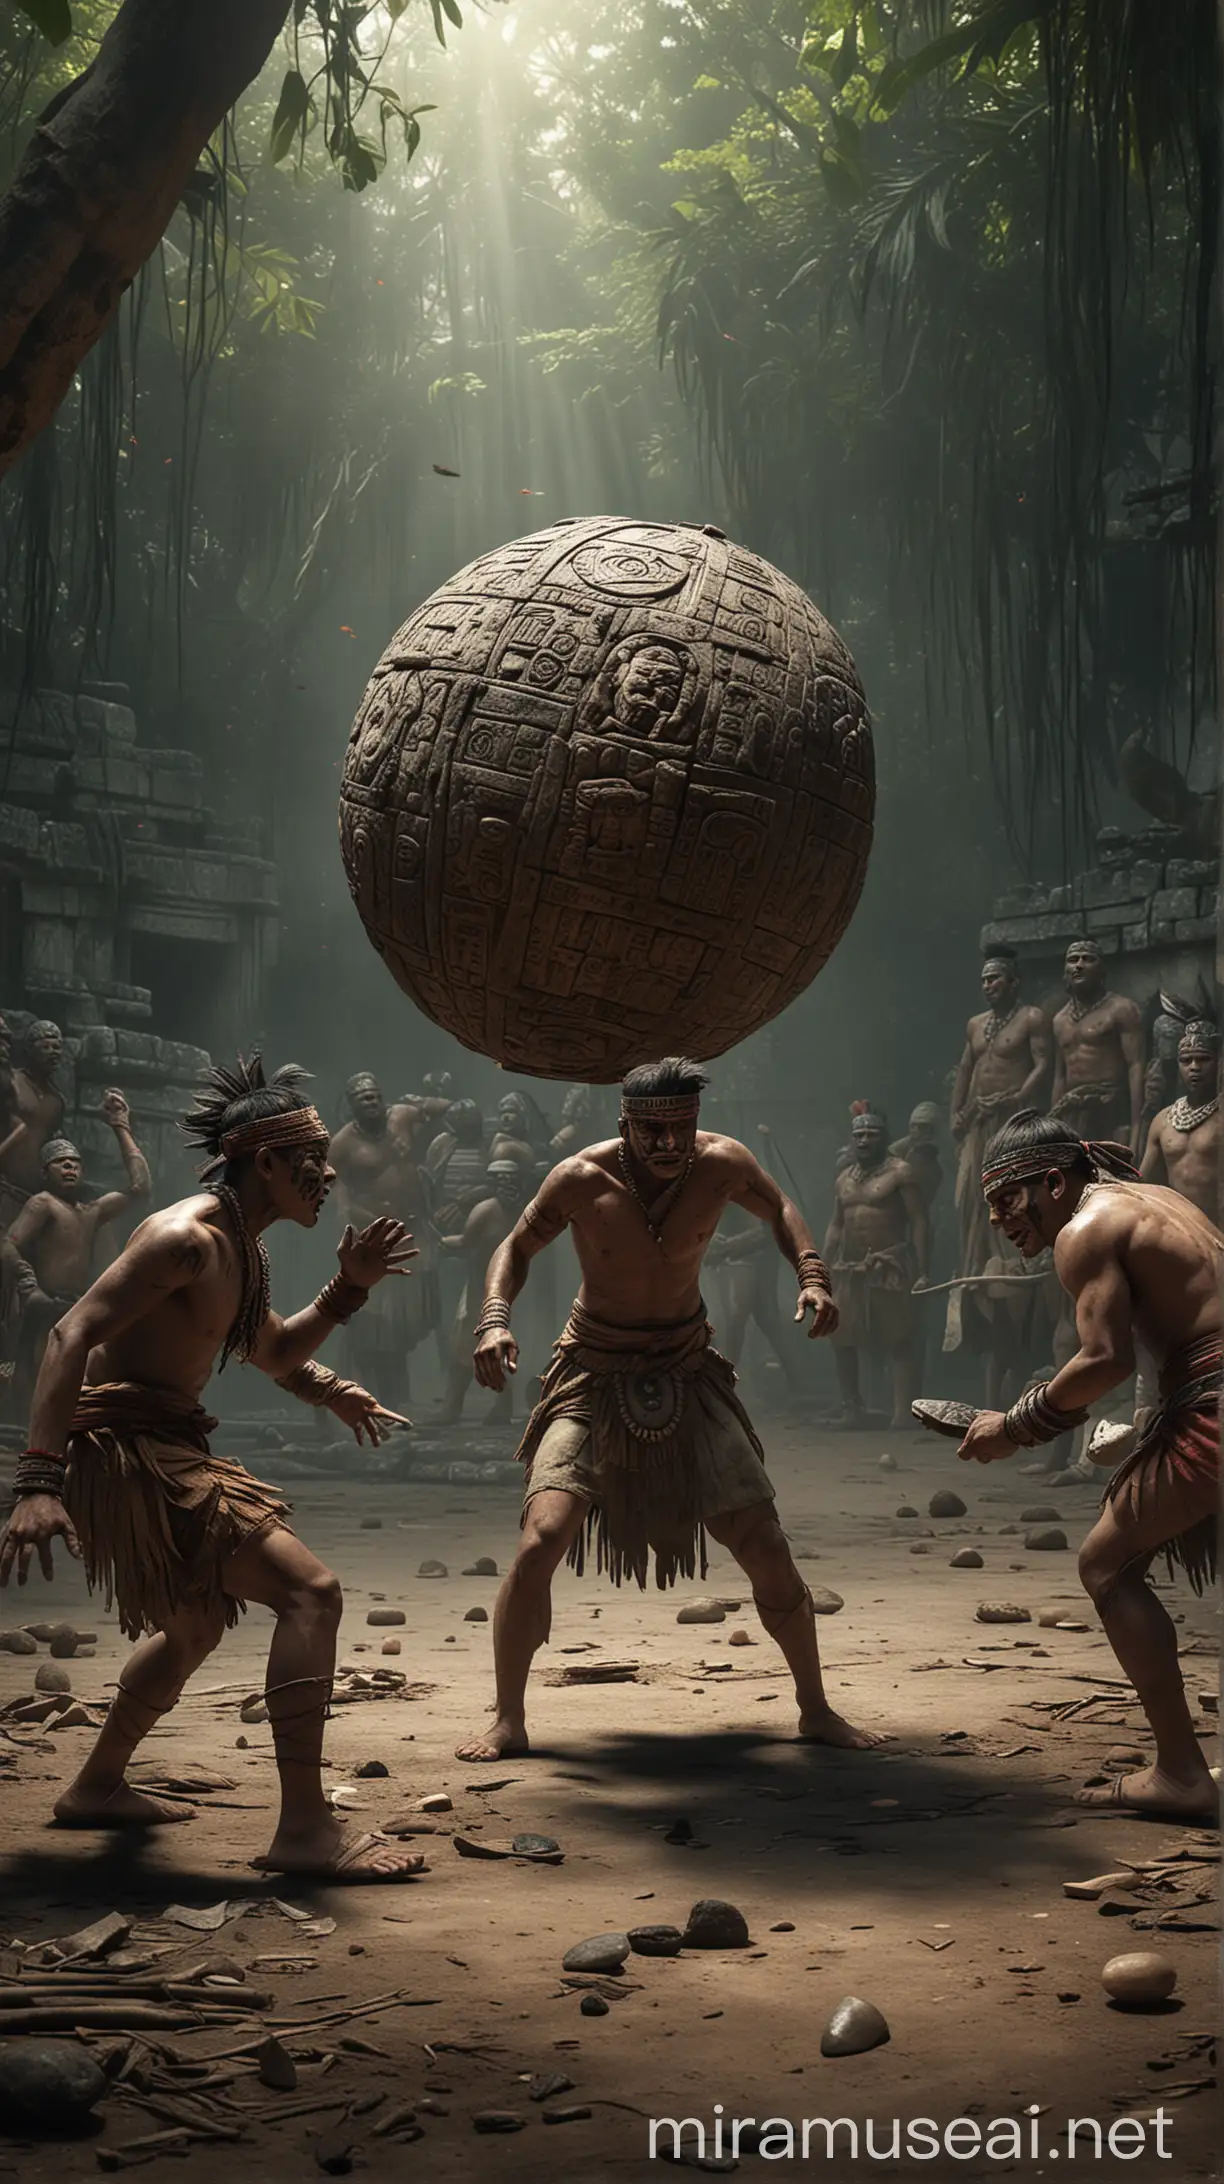 Intense Mayan Ball Game Pokotar Capturing Deadly Stakes in Hyper Realistic Art